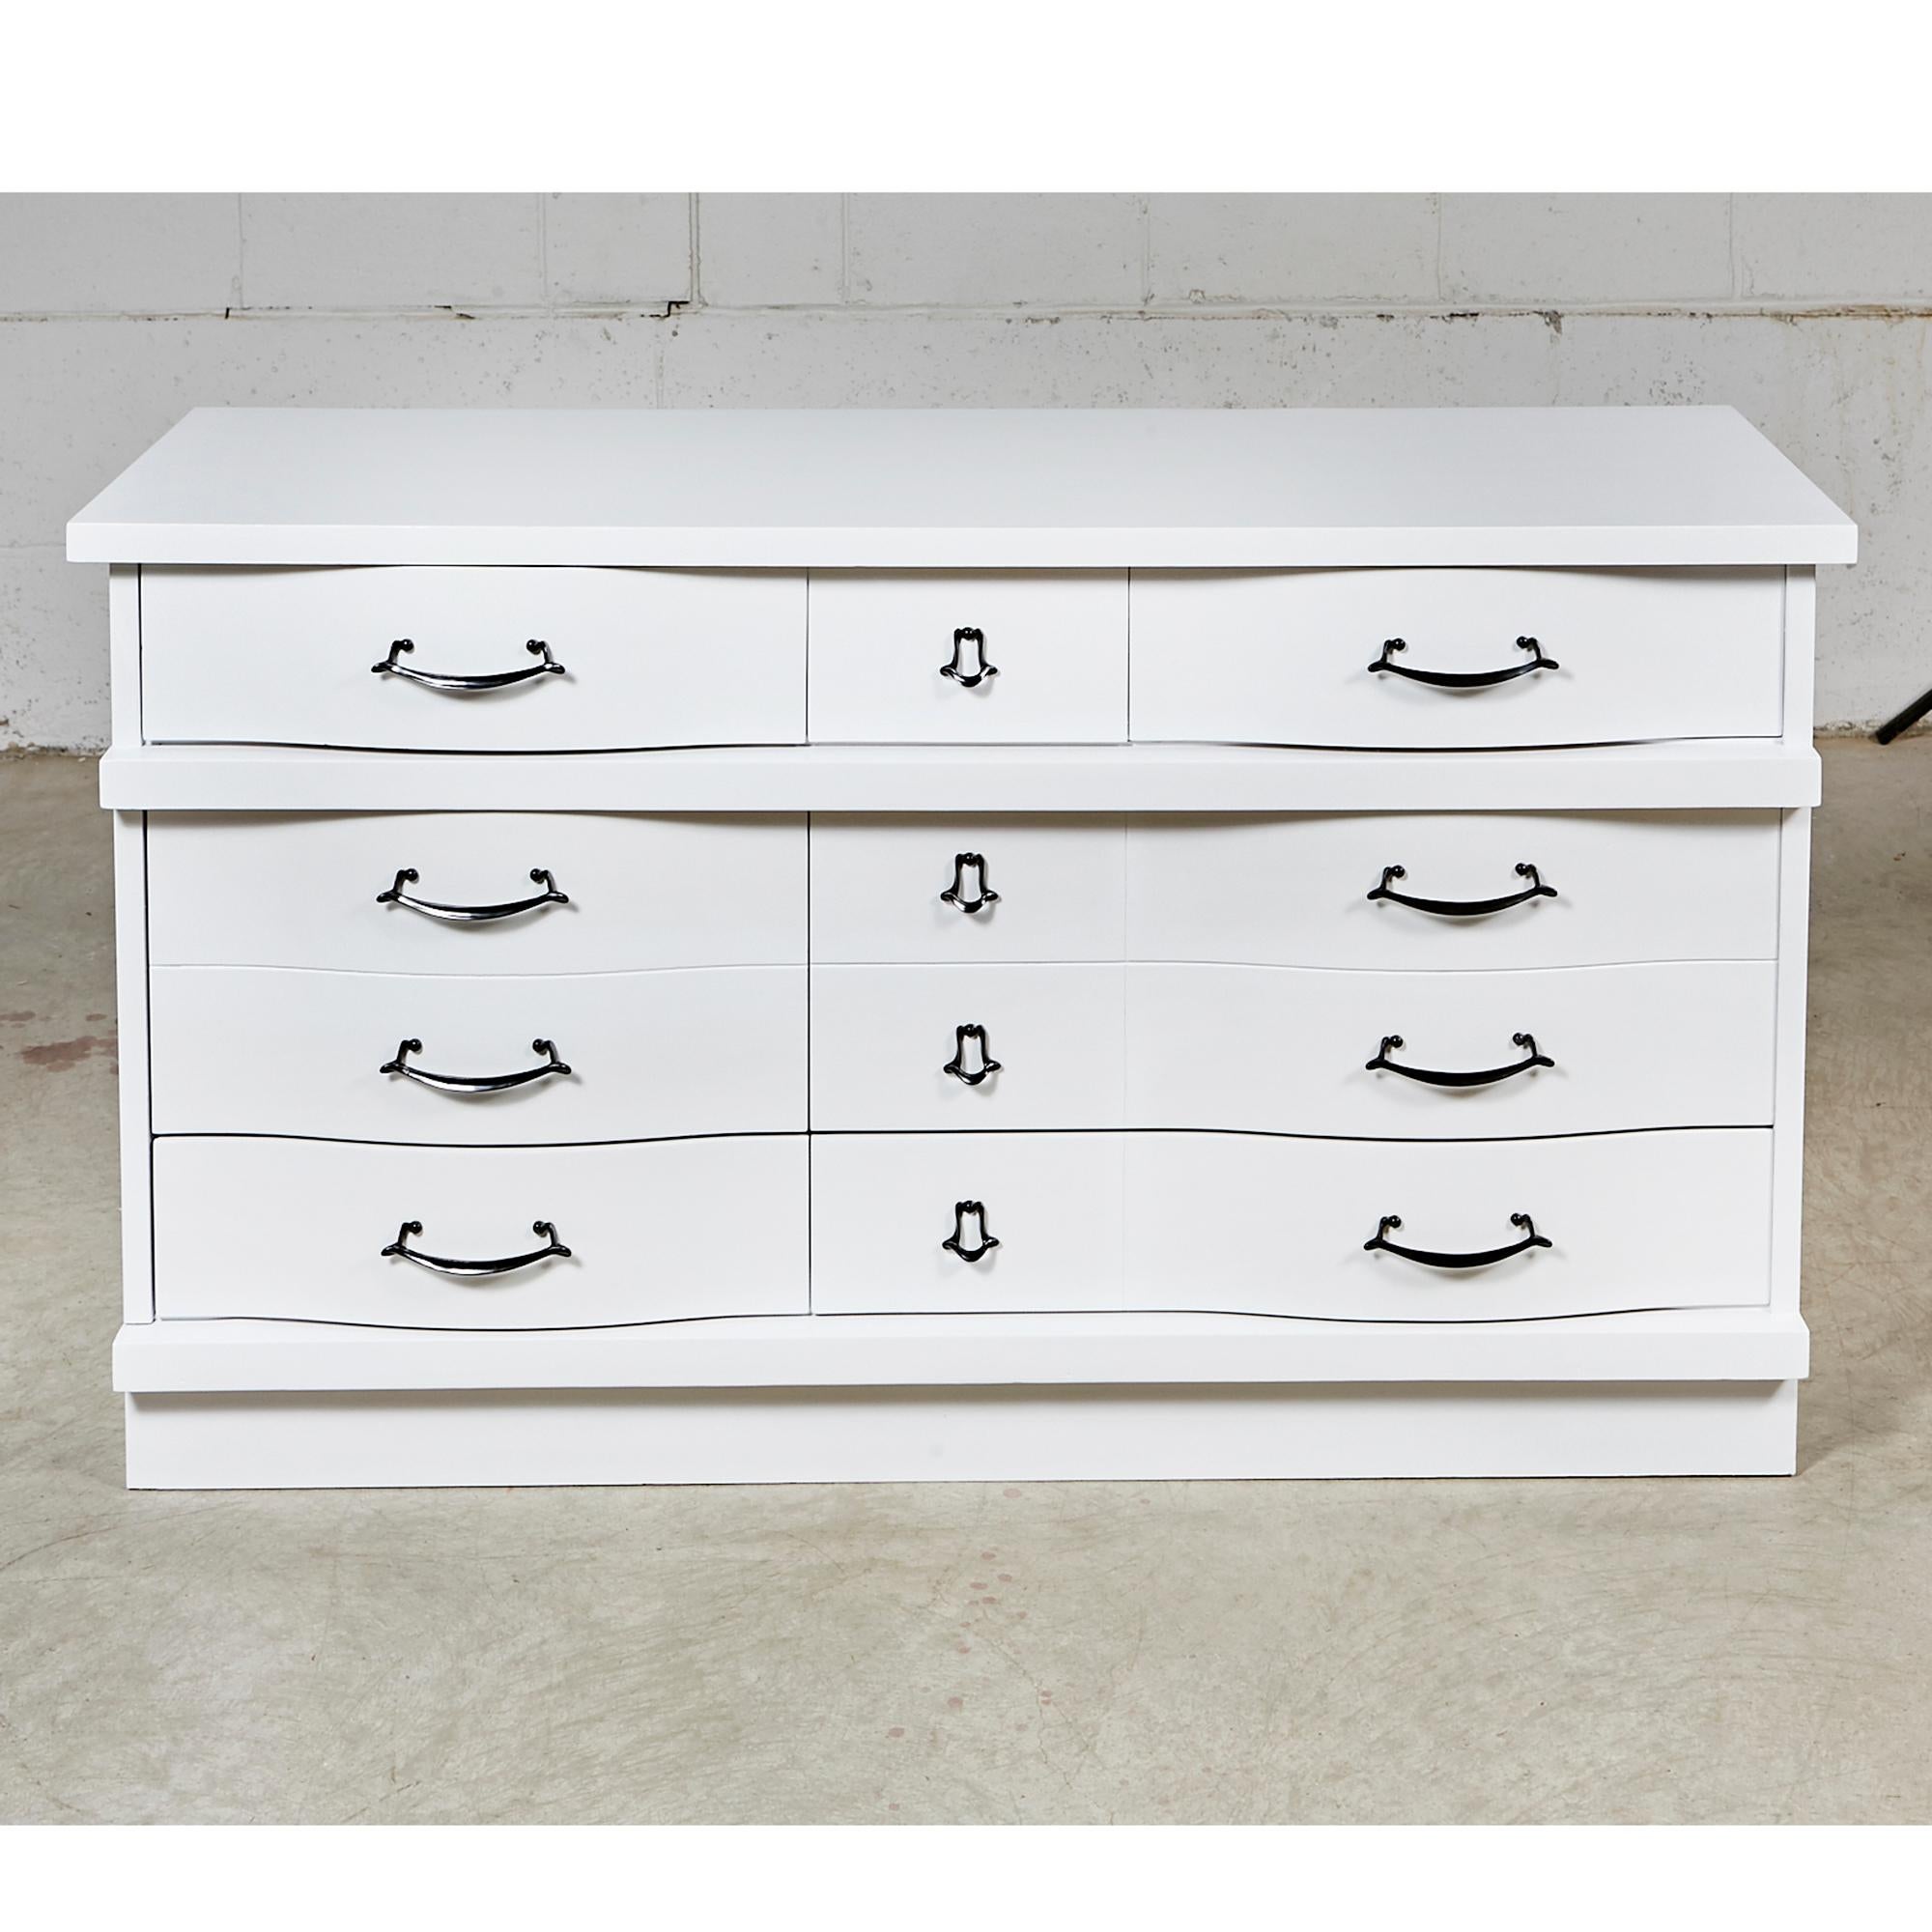 Vintage 1960s white painted three-drawer dresser with black painted pulls. Middle drawer is doubled in size. Newly refinished condition.